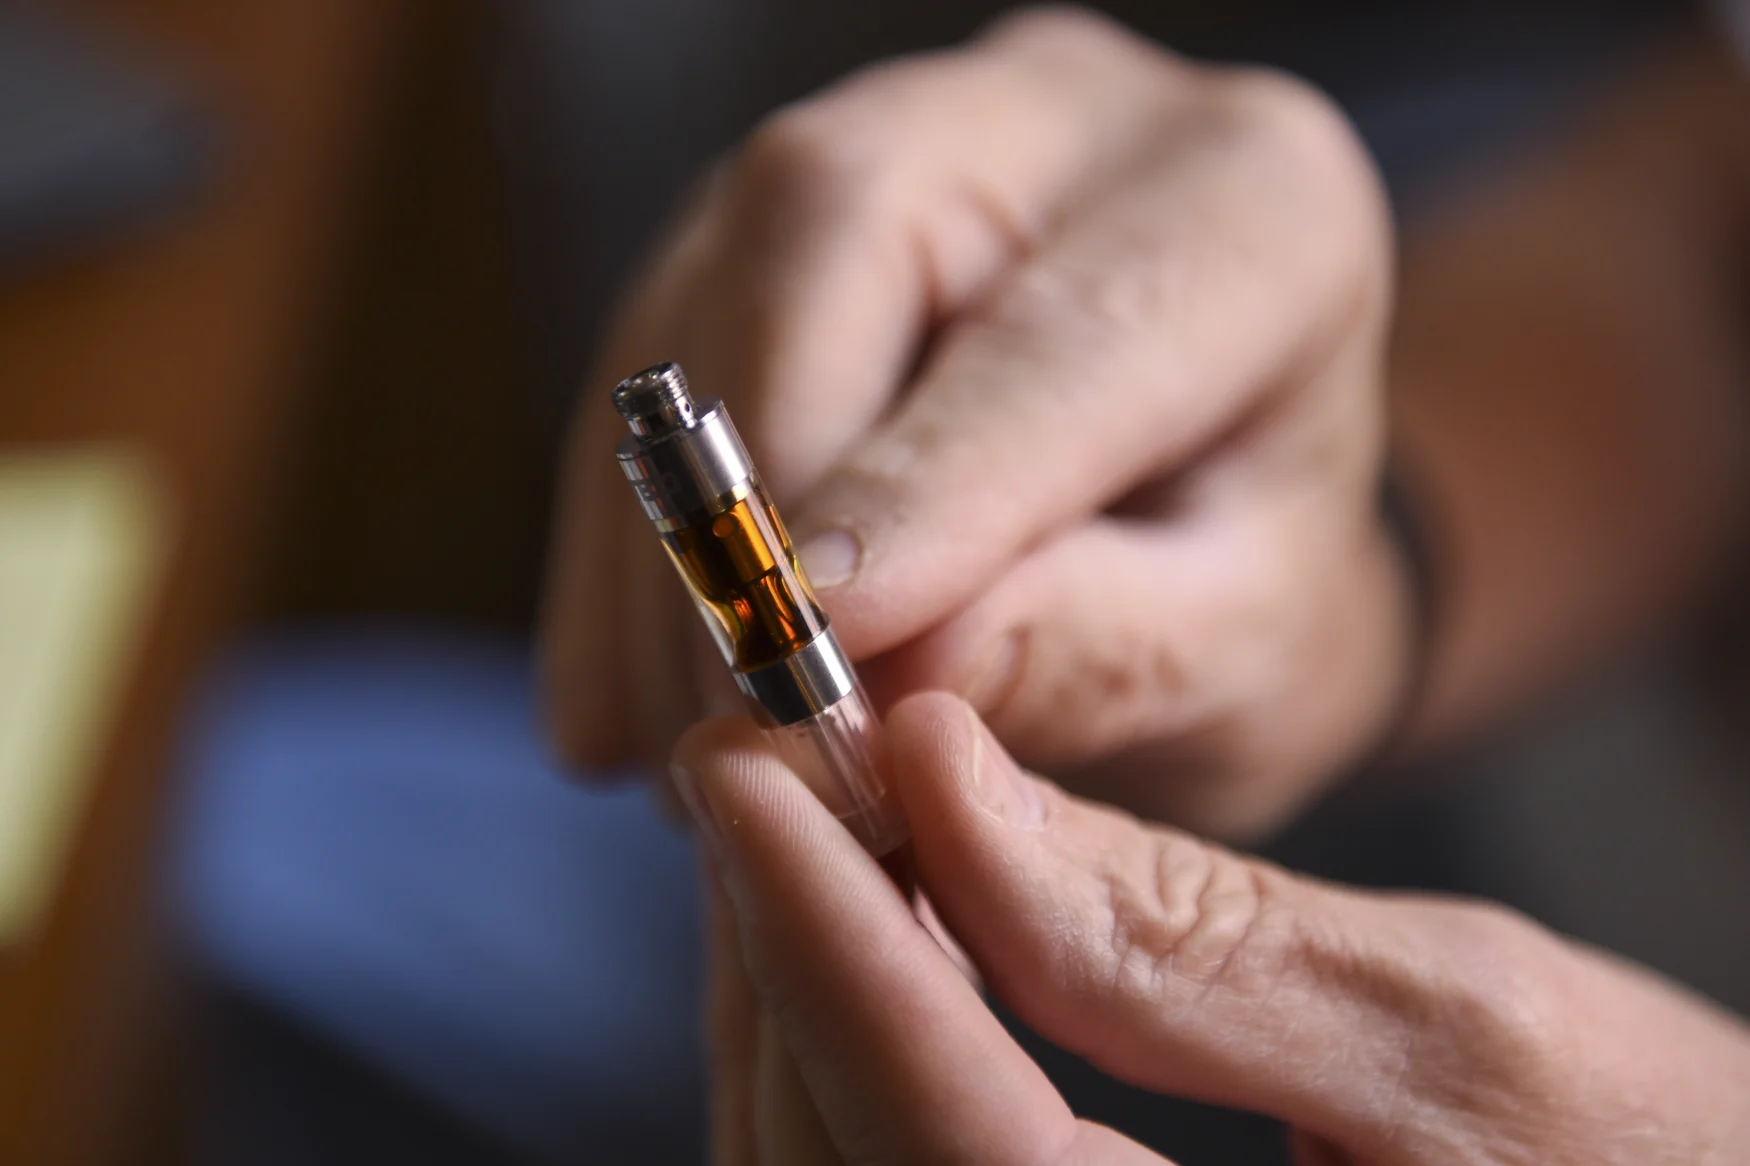 Ted Chase points the amount left in his medical marijuana vape cartridge. Photo by Lauren A. Little (Photo By Lauren A. Little/MediaNews Group/Reading Eagle via Getty Images)